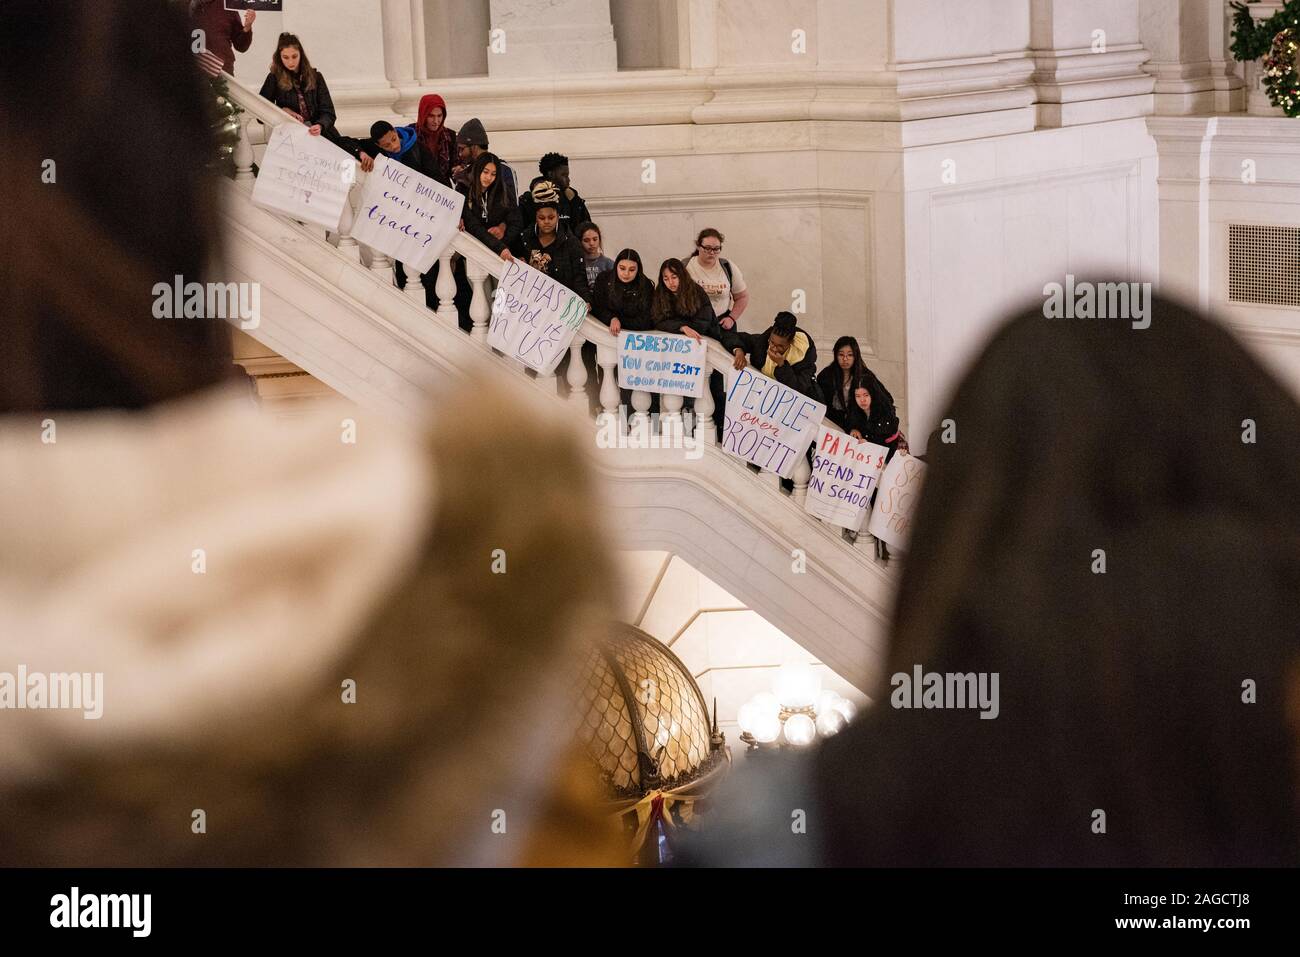 Harrisburg, Pennsylvania, USA. 18th Dec 2019. Following a string of school closings over asbestos concerns students, teachers, faith leaders, law makers and union representatives rallied at the State House calling on the state government to access available funds to invest in critical infrastructure needs. December 18, 2019. Credit: Chris Baker Evens / Alamy Live News Stock Photo